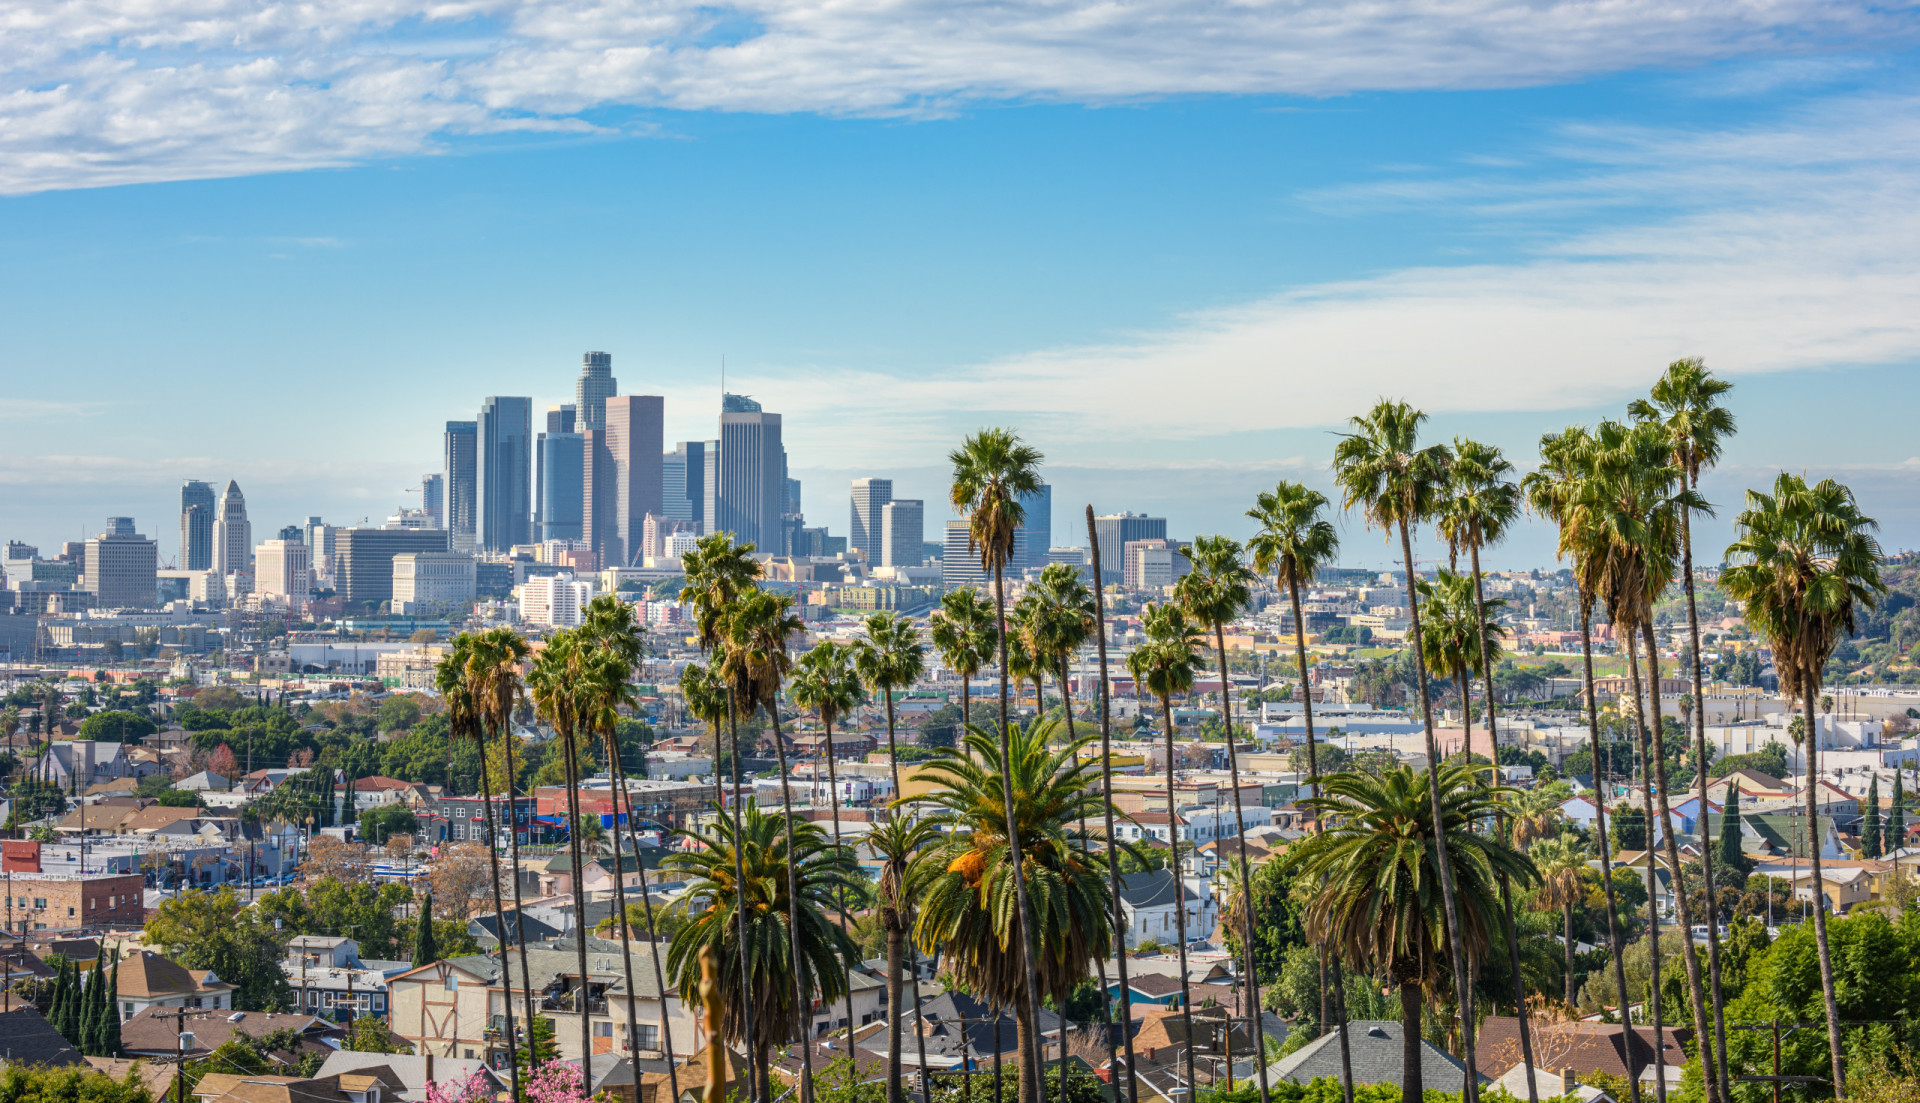 <p>With a rent index of 72.3, Los Angeles epitomizes the blend of entertainment, culture, and business. Known for Hollywood, it's a city where dreams are pursued, albeit at a high cost of living.</p><p><a href="https://www.msn.com/en-in/community/channel/vid-7xx8mnucu55yw63we9va2gwr7uihbxwc68fxqp25x6tg4ftibpra?cvid=94631541bc0f4f89bfd59158d696ad7e">Follow us and access great exclusive content every day</a></p>